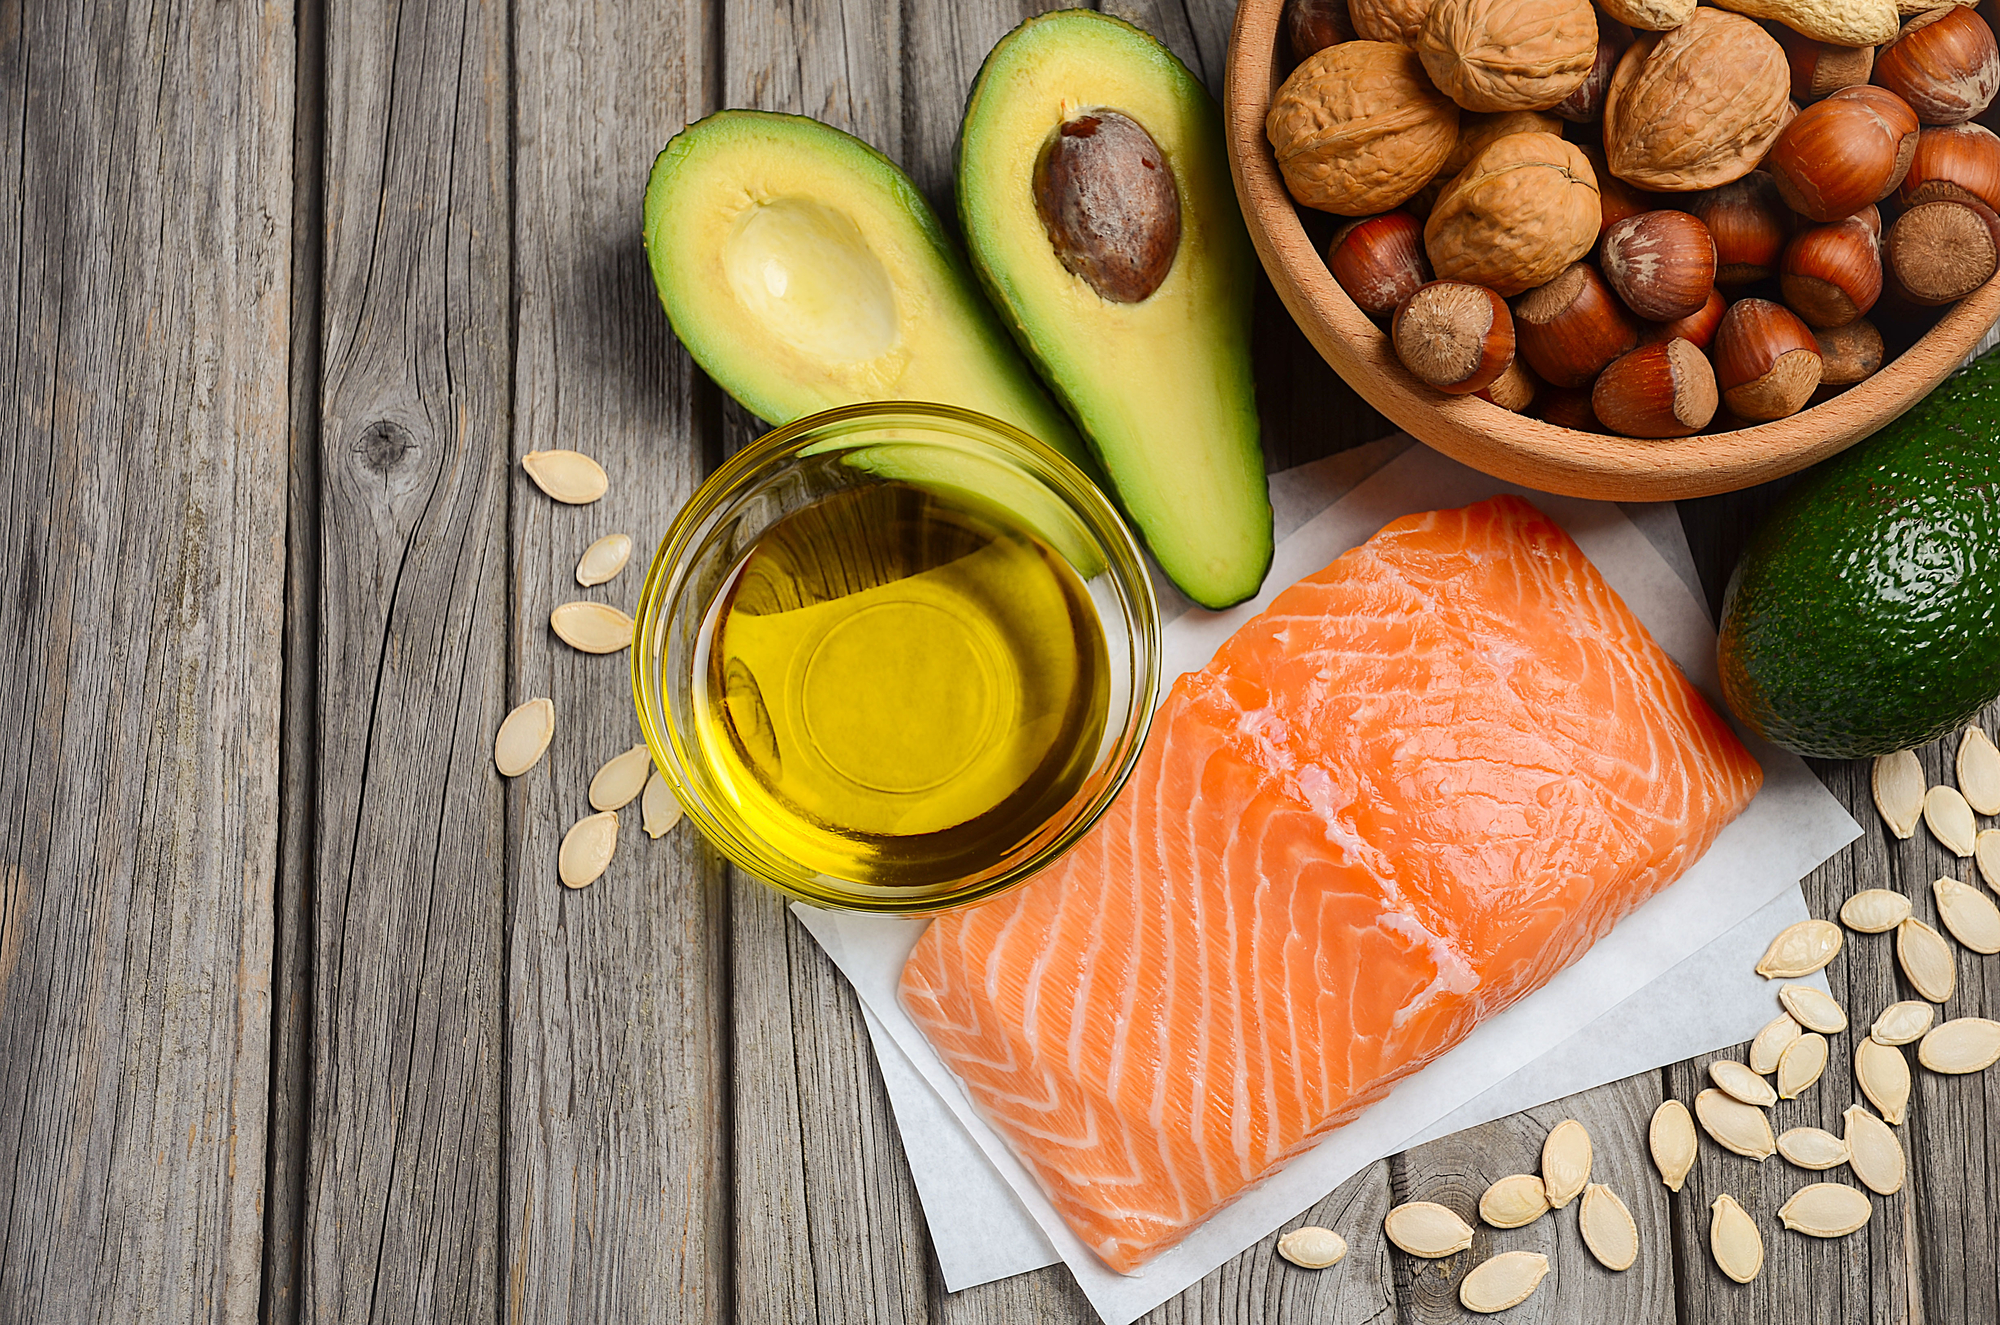 When the brain doesn't have enough of the right kind of fats like Omega-3 (alpha linolenic) and Omega-6 (linoleic) fatty acids, it cannot develop and function optimally